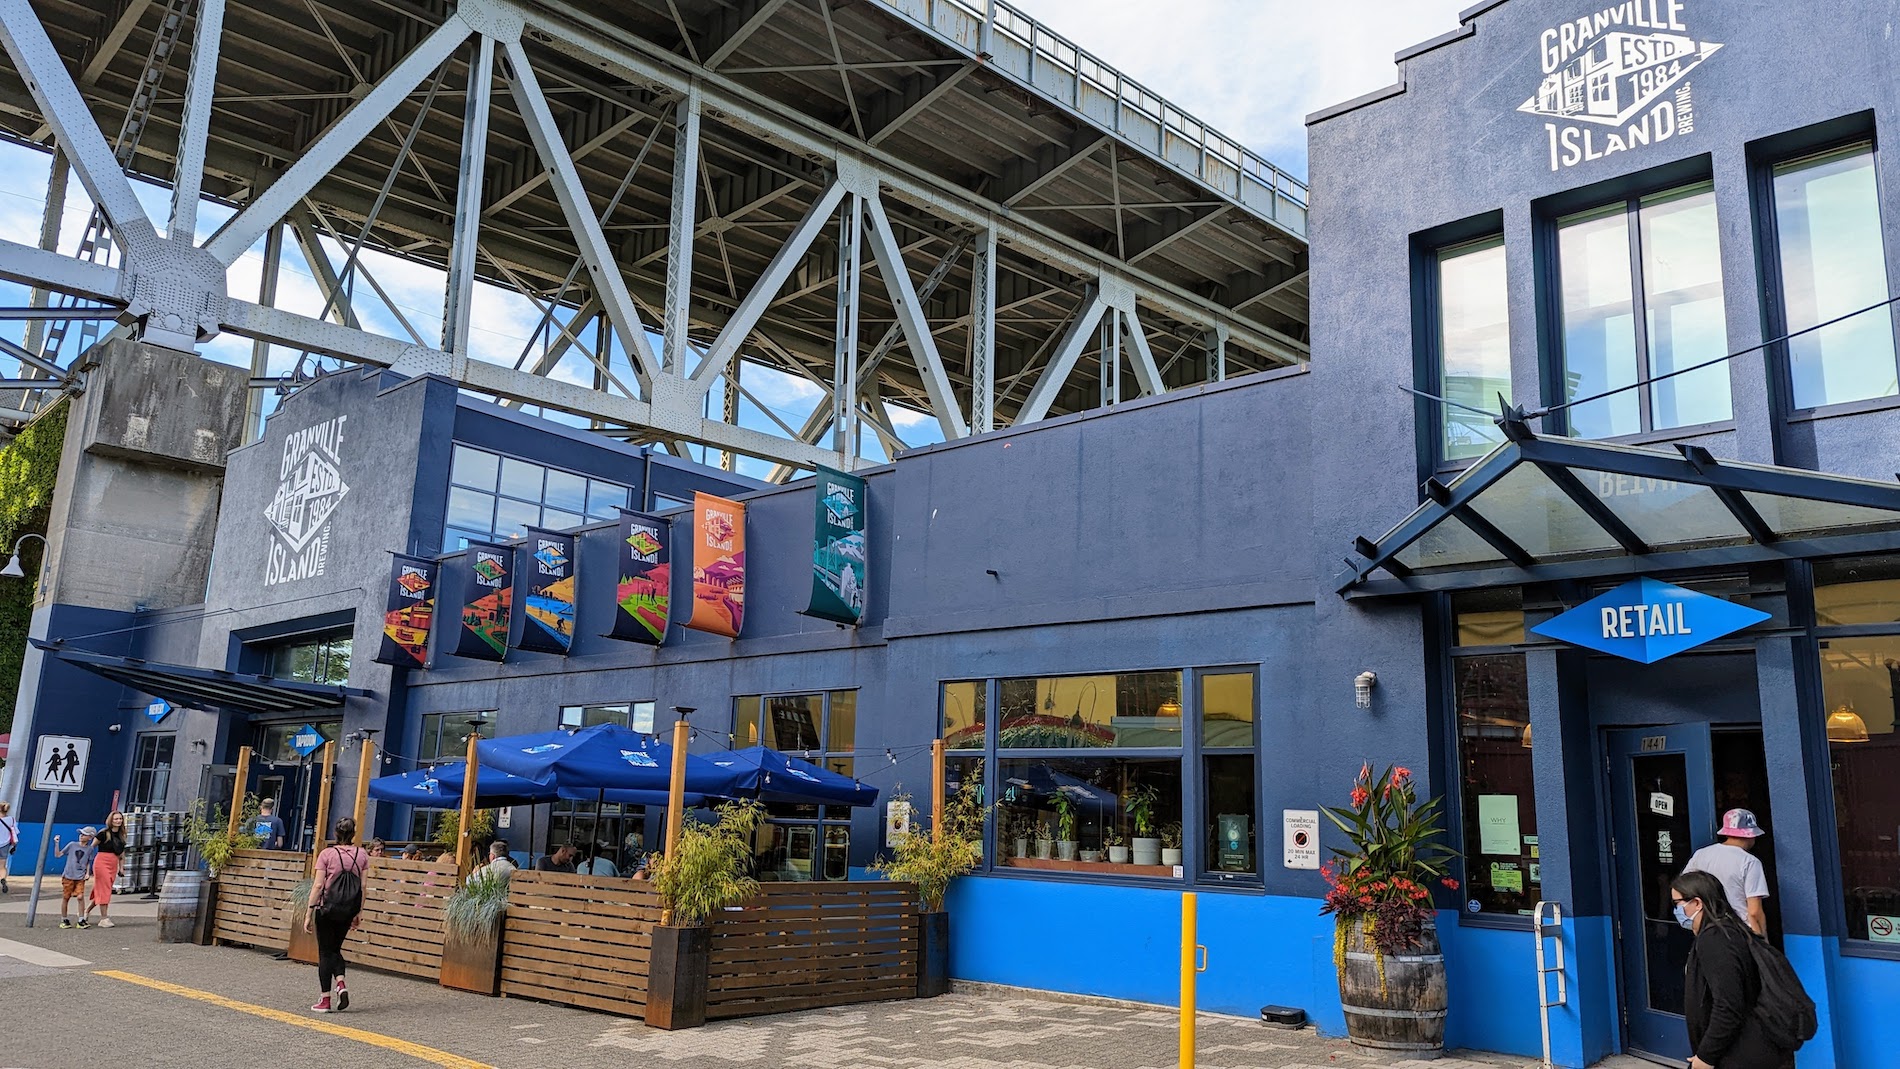 Soak in the Last Minutes of Summer with The Granville Island Patio Experience